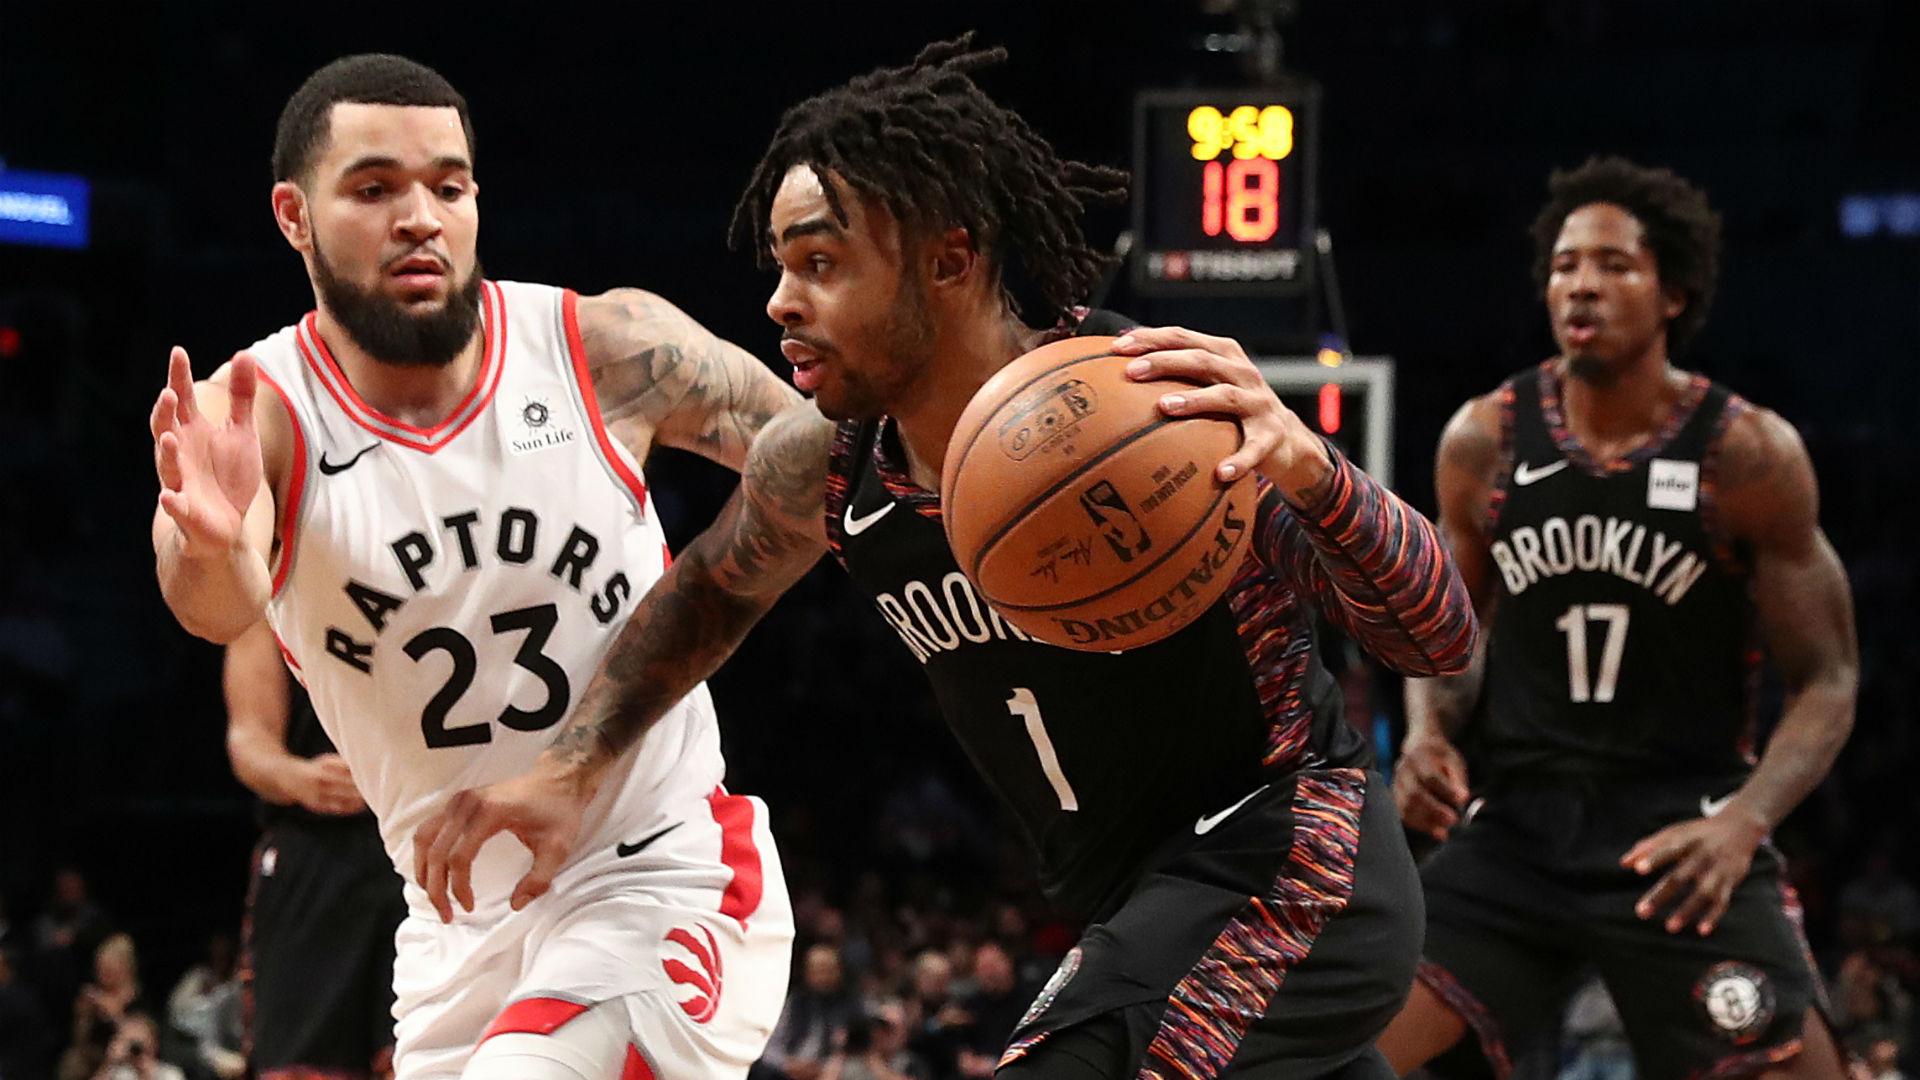 Raptors vs. Nets: Game preview, live stream, TV channel, start time | Sporting News1920 x 1080